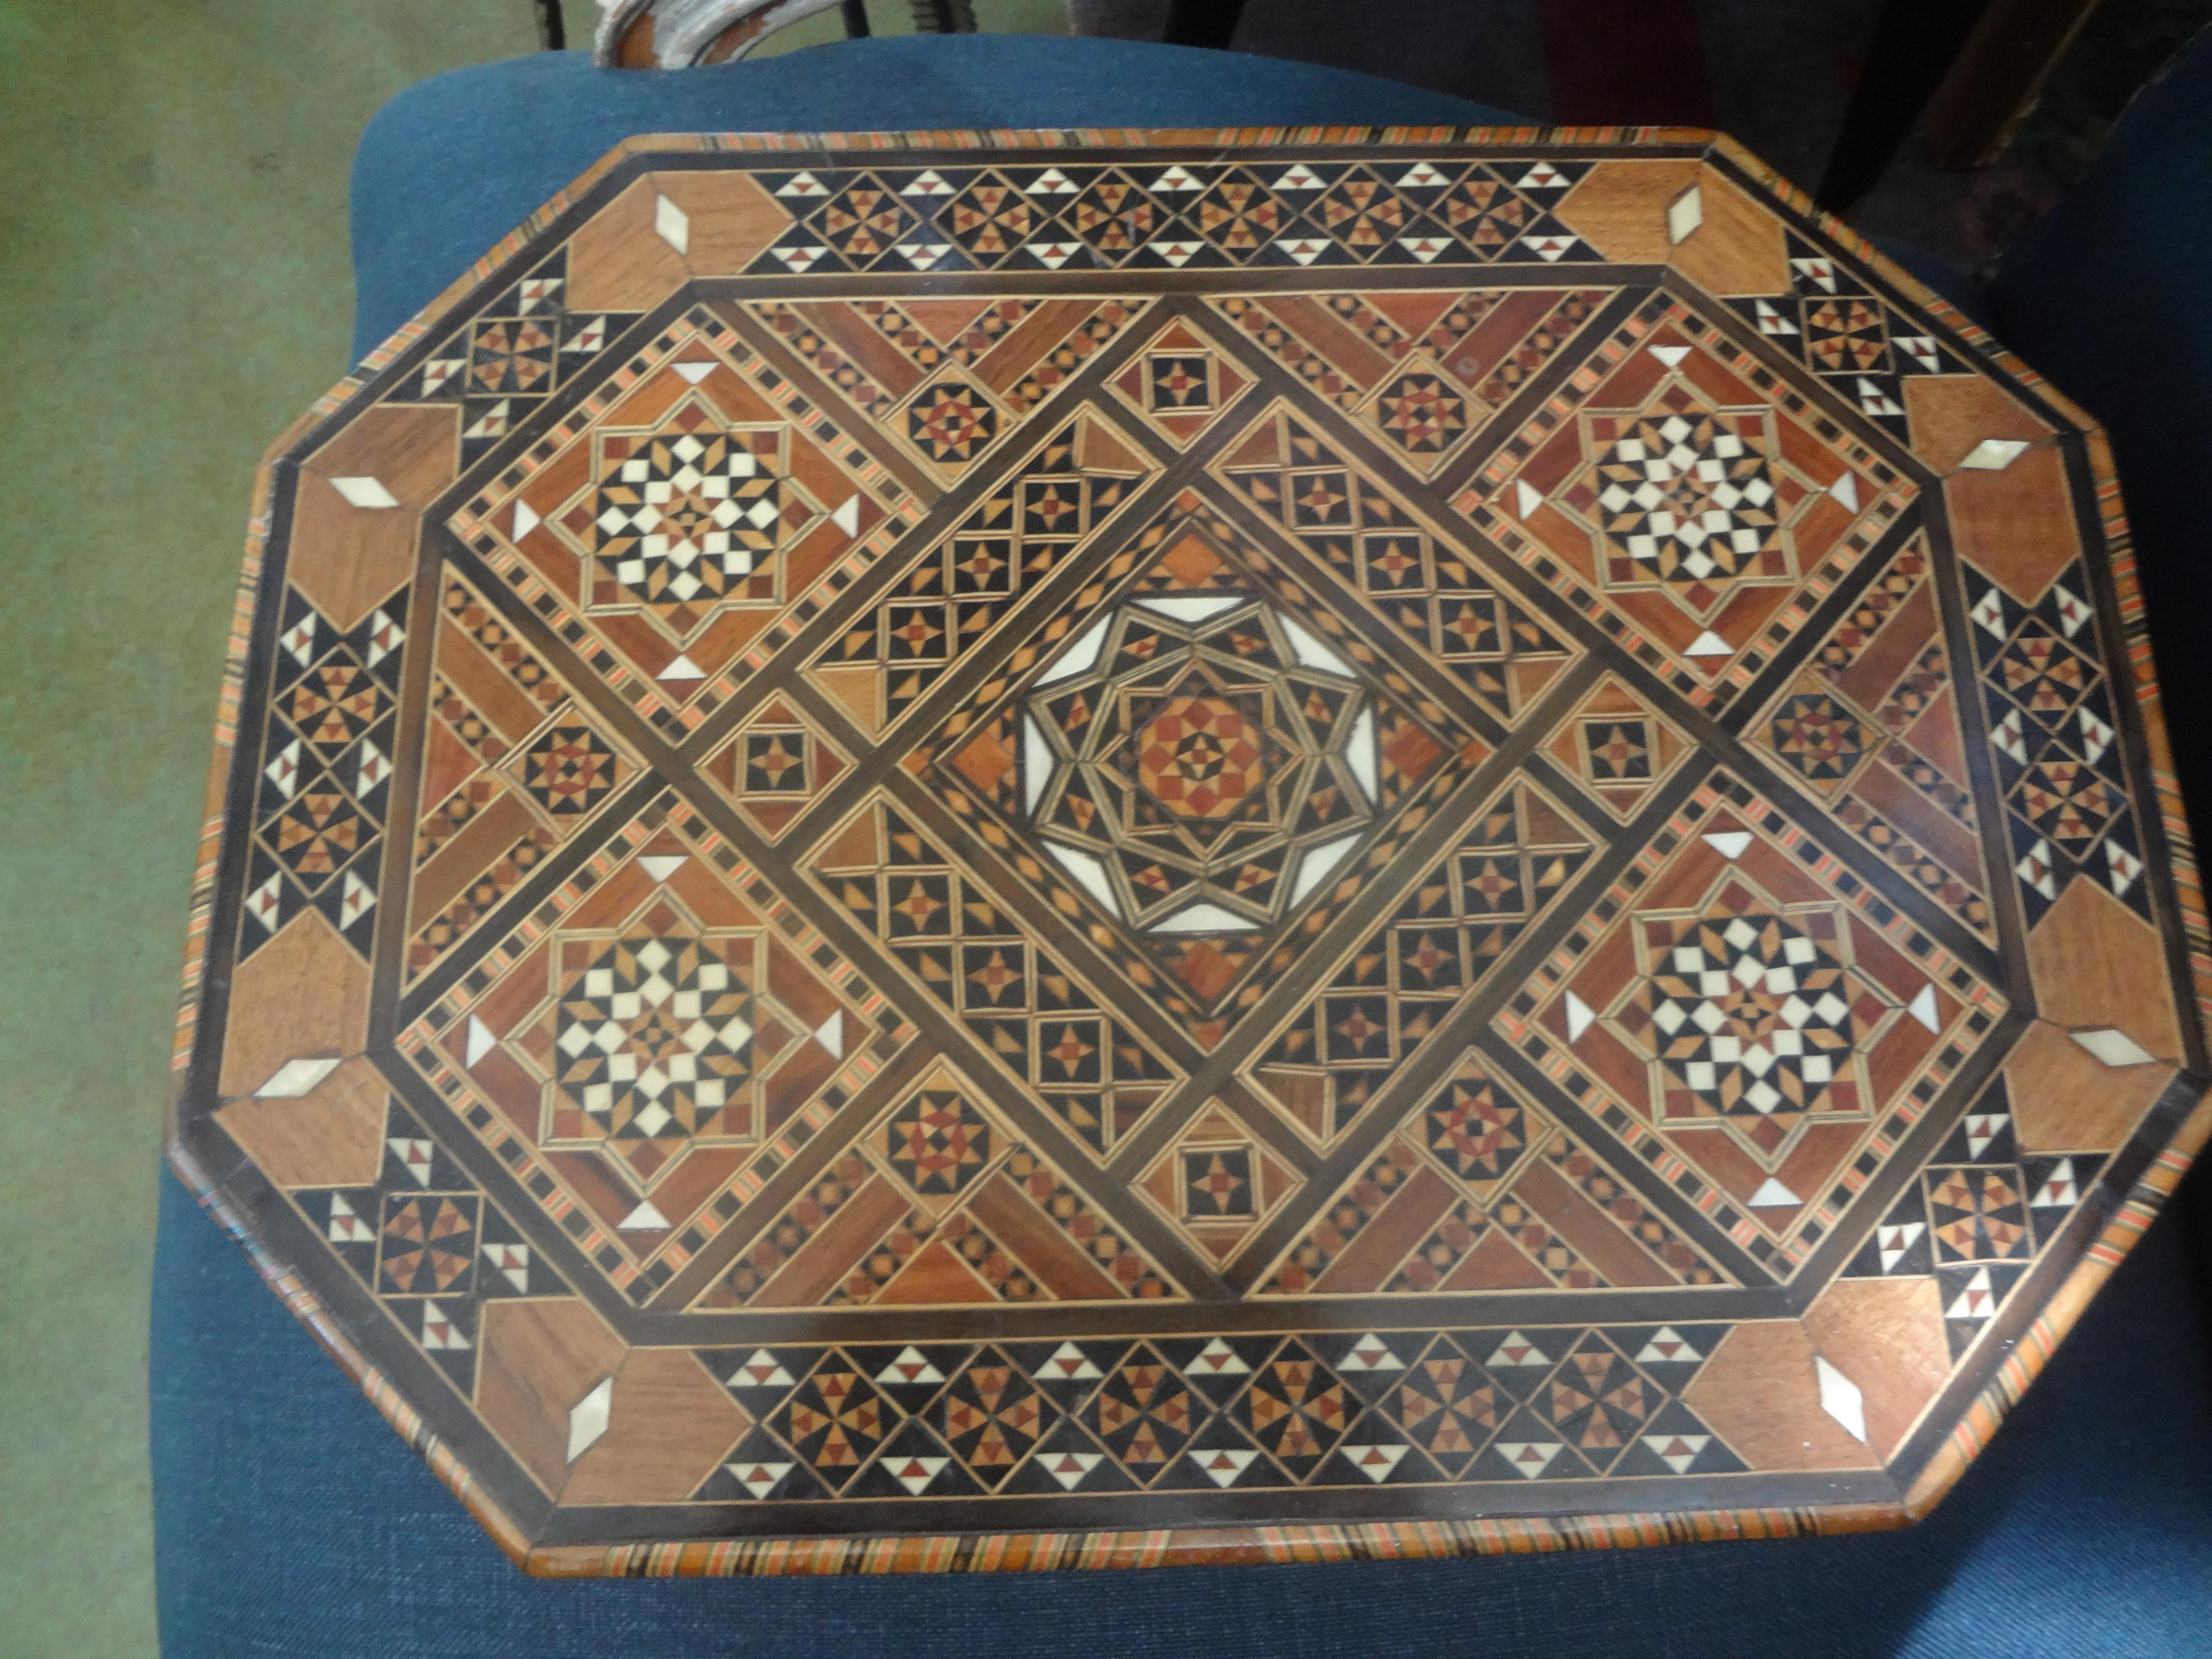 Unknown Large Moroccan or Middle Eastern Octagonal Box with Inlaid Mother of Pearl